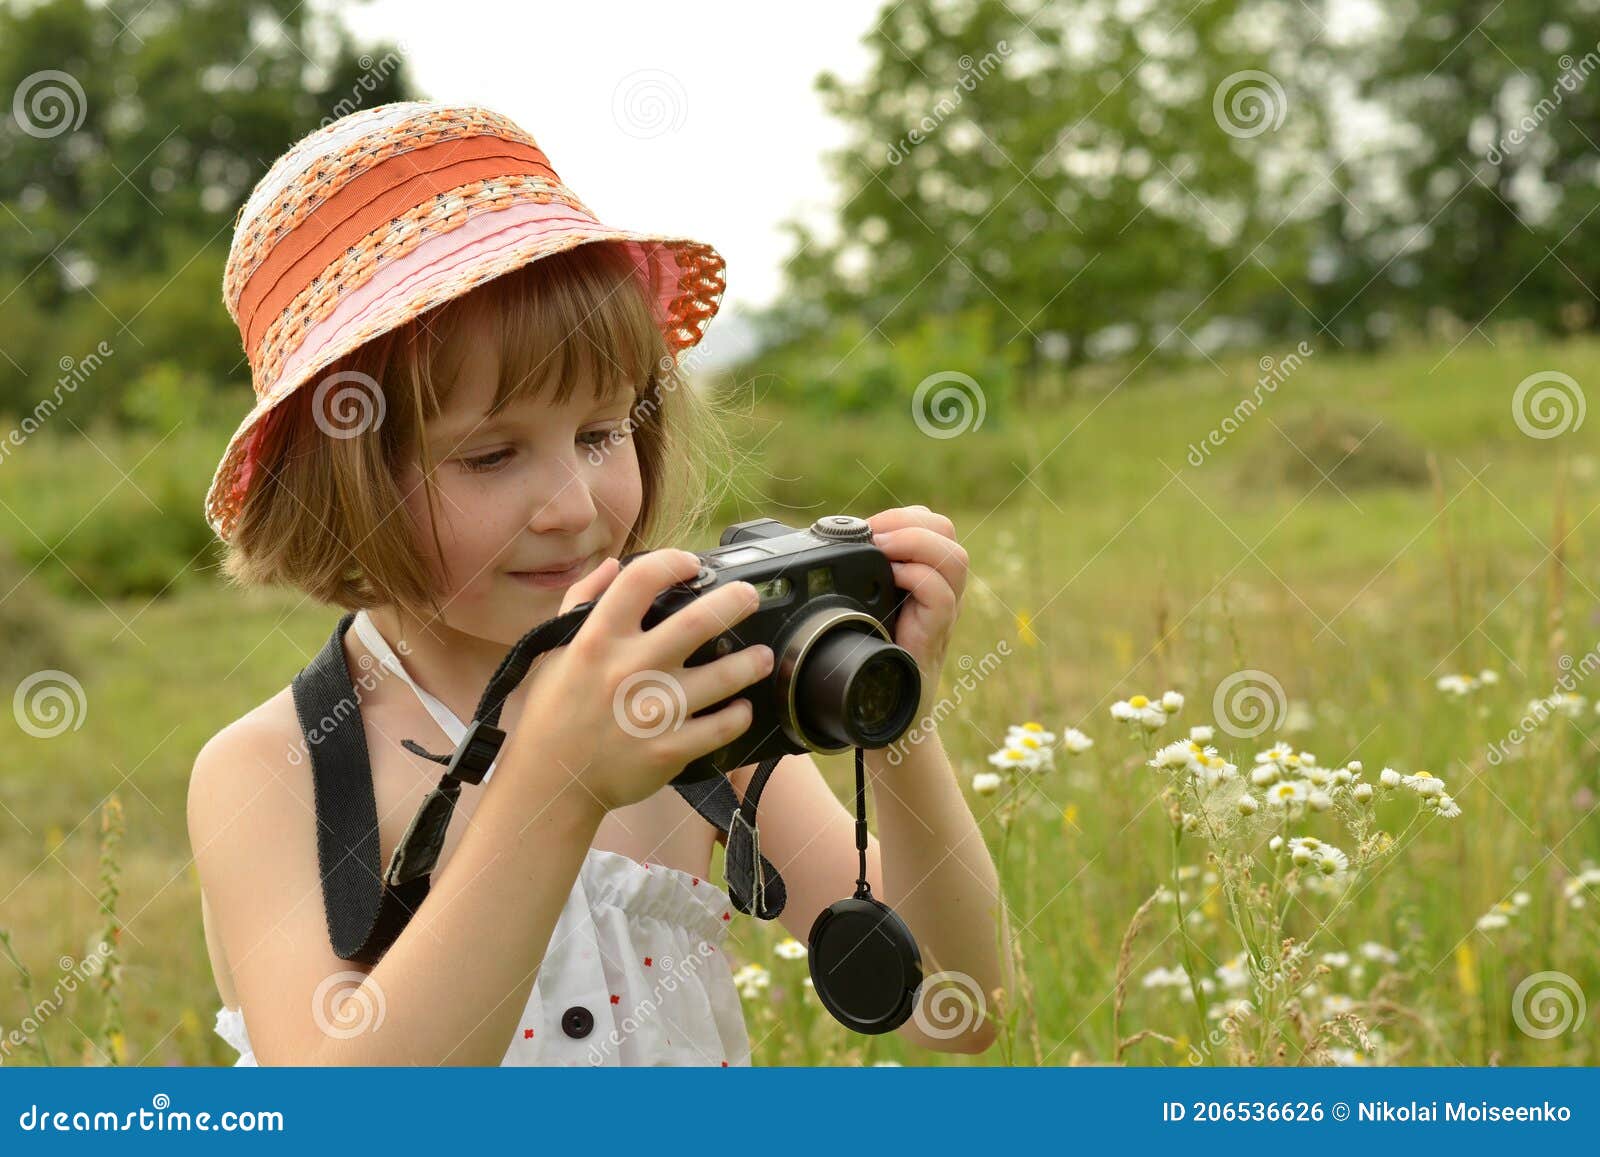 Child, Kid Photographer a Little Girl with a Camera on the ...